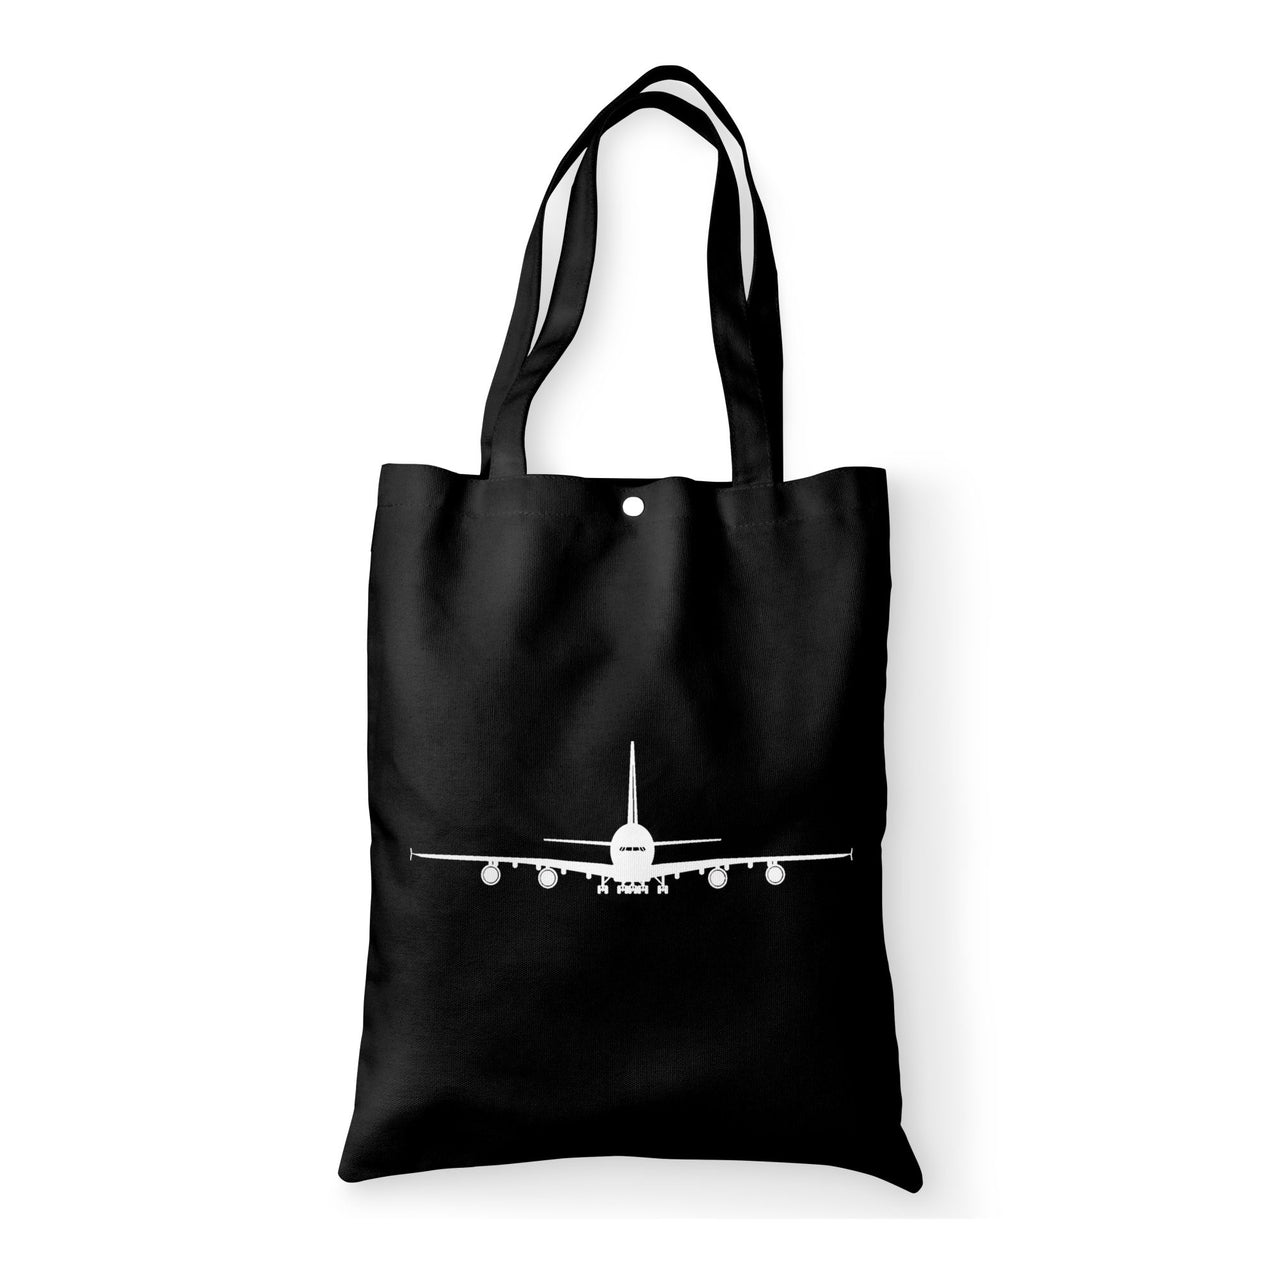 Airbus A380 Silhouette Designed Tote Bags